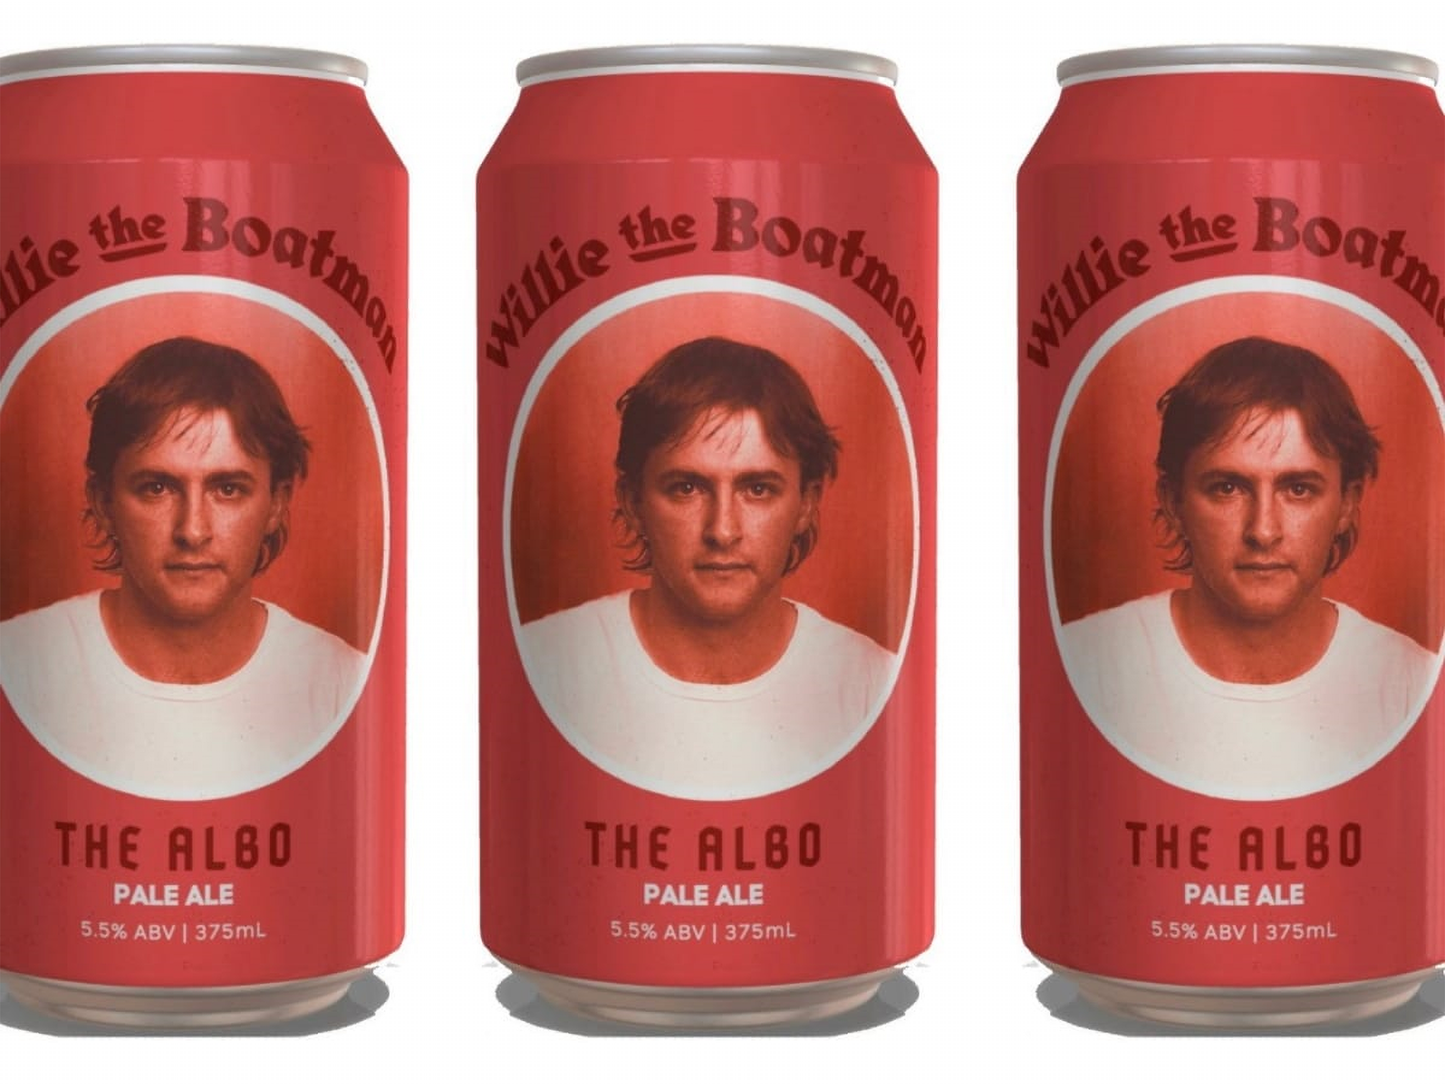 Willie The Boatman The Albo Pale Ale (Can)